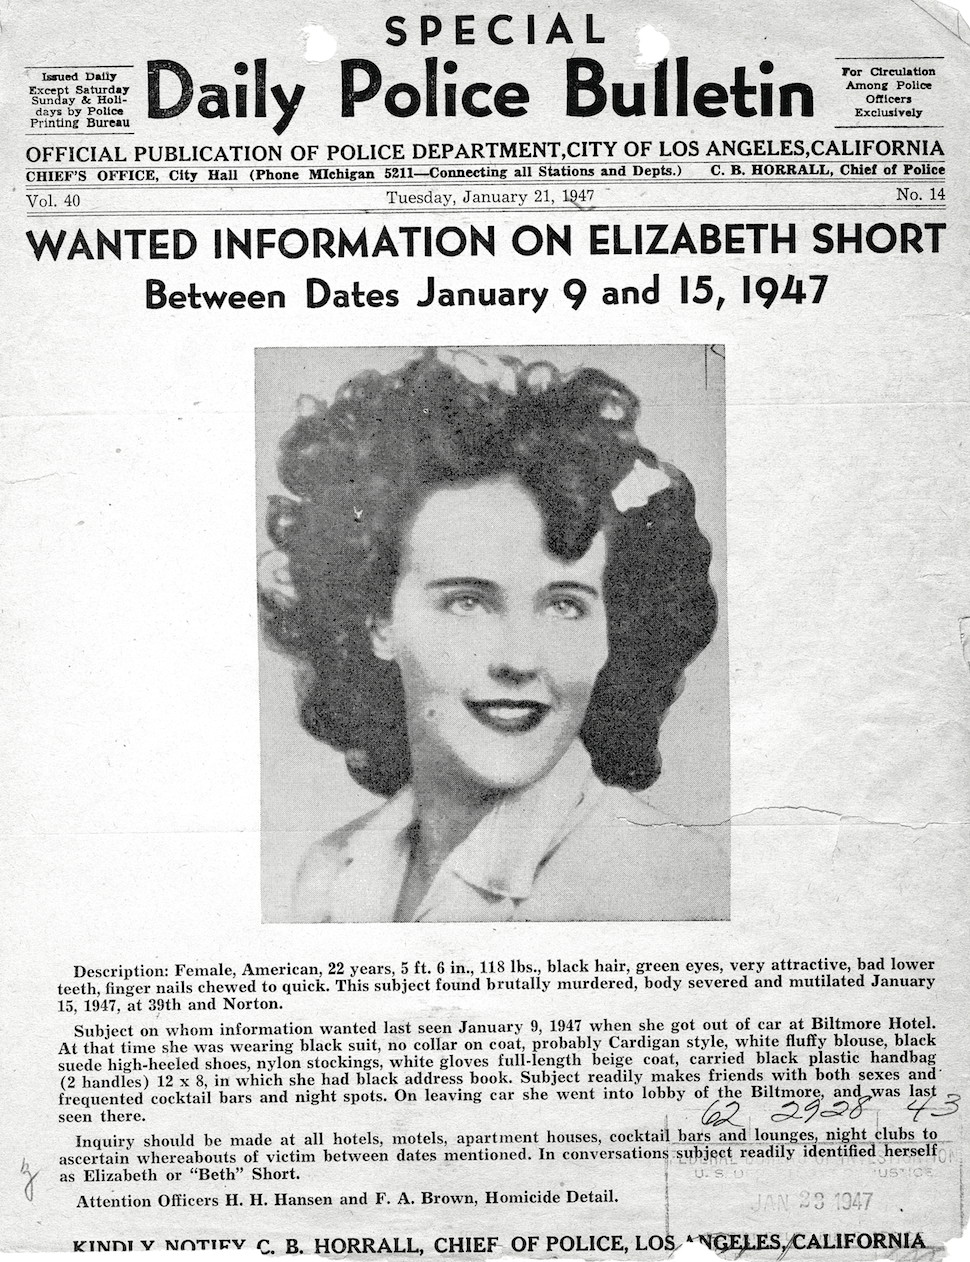 Black Dahlia Wanted - Dread: The Unsolved Studies the Perplexing Mutilation of The Black Dahlia